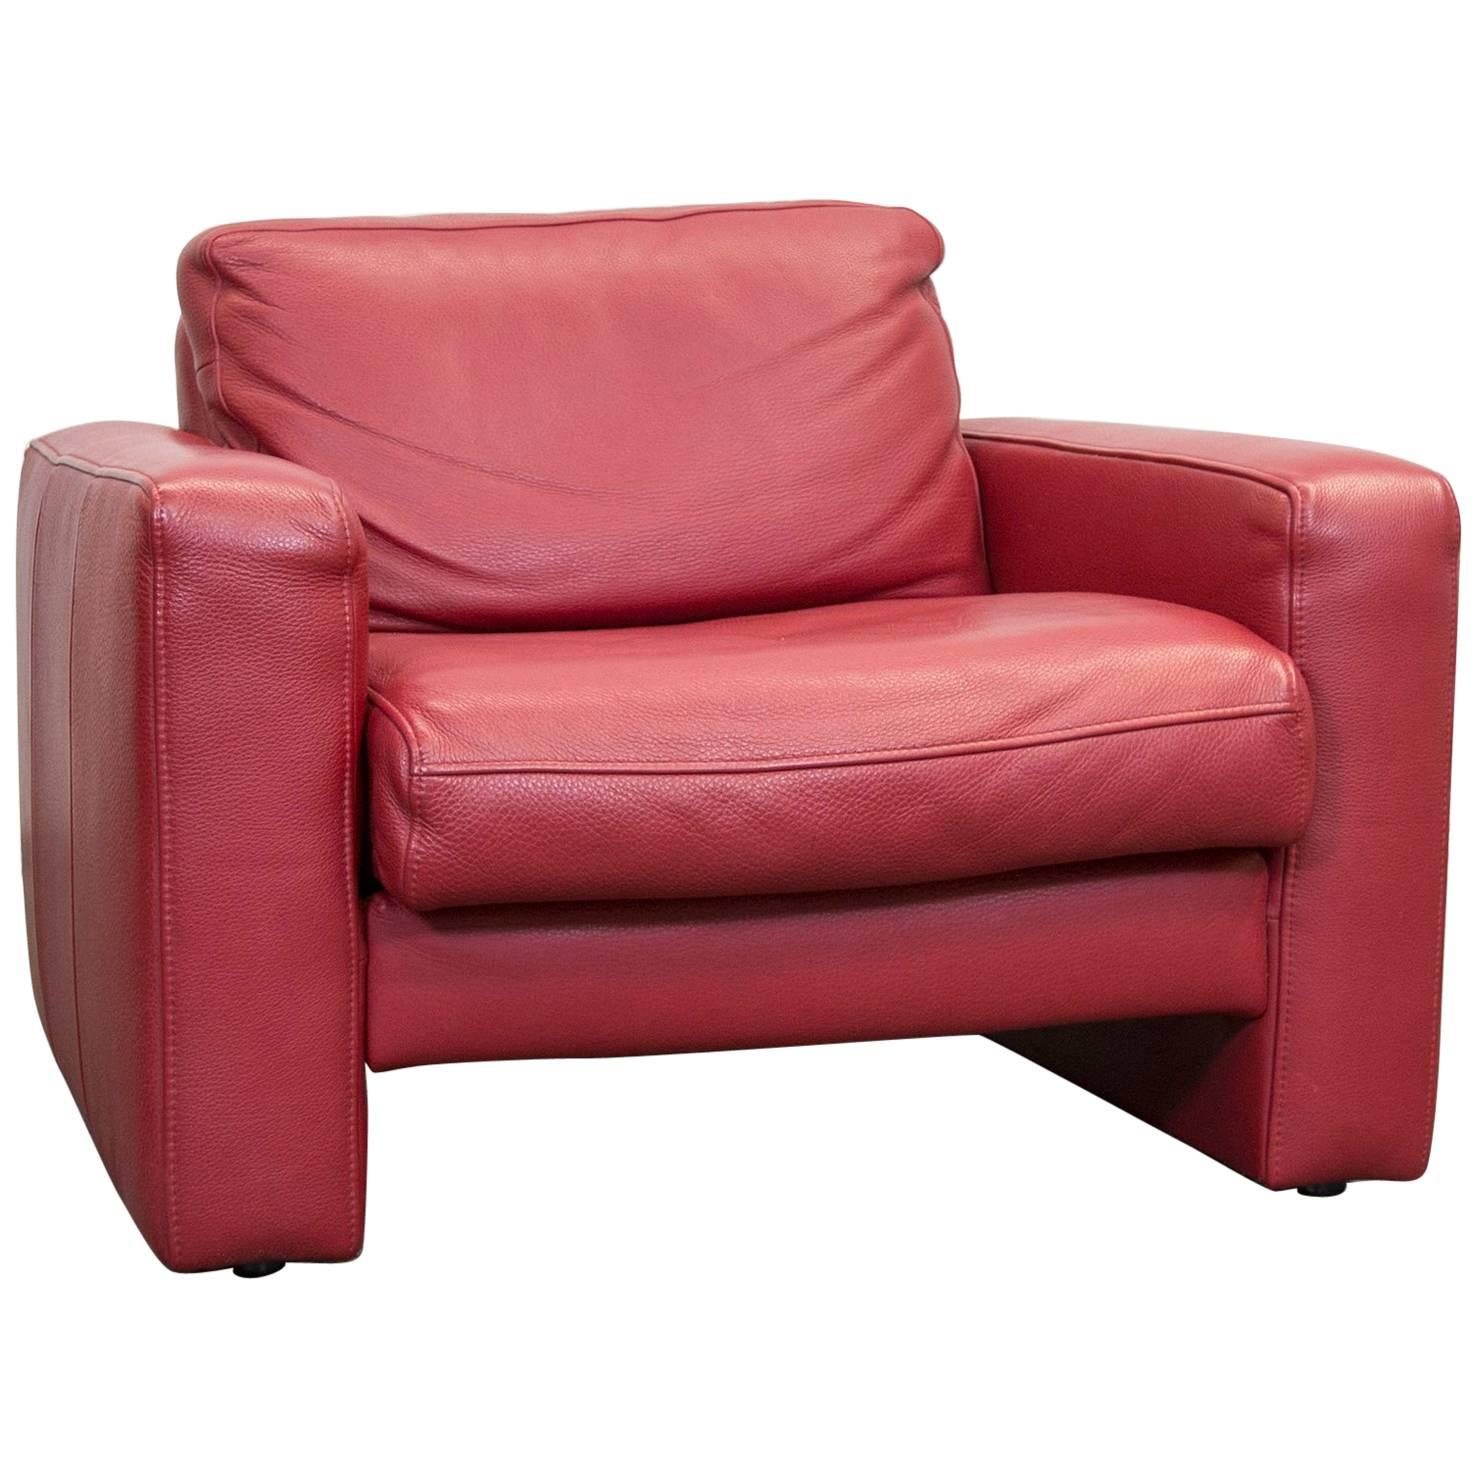 Designer Leather Armchair Red One-Seat Chair Modern